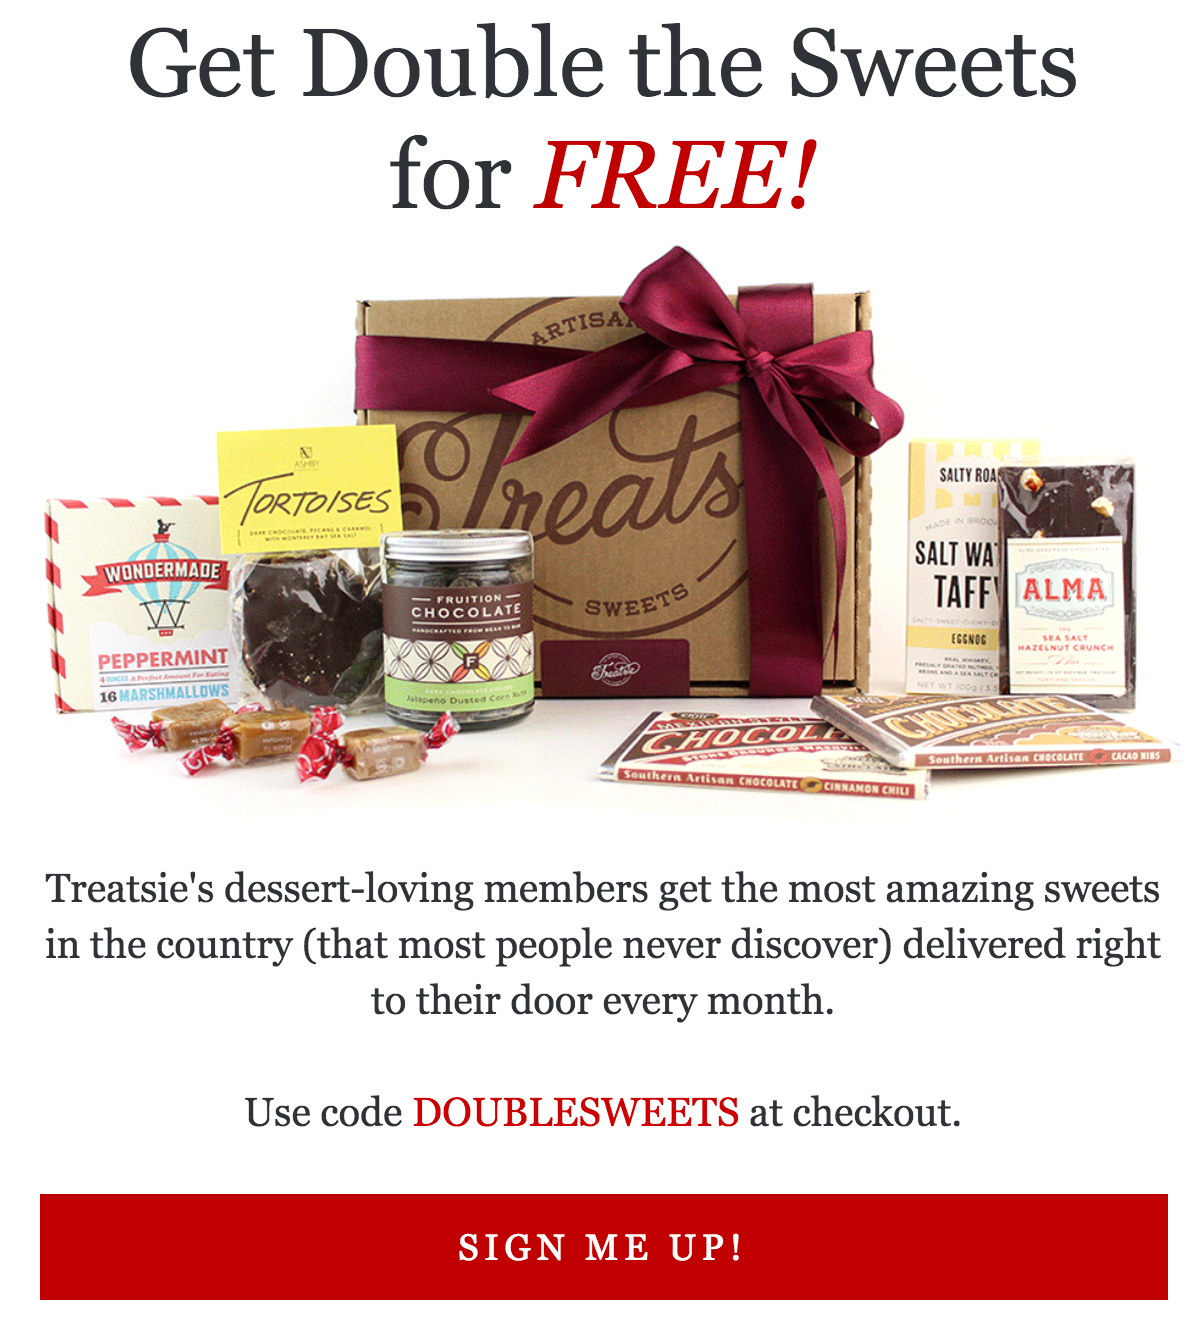 New Treatsie Offer – Get Double the Treats for Free!